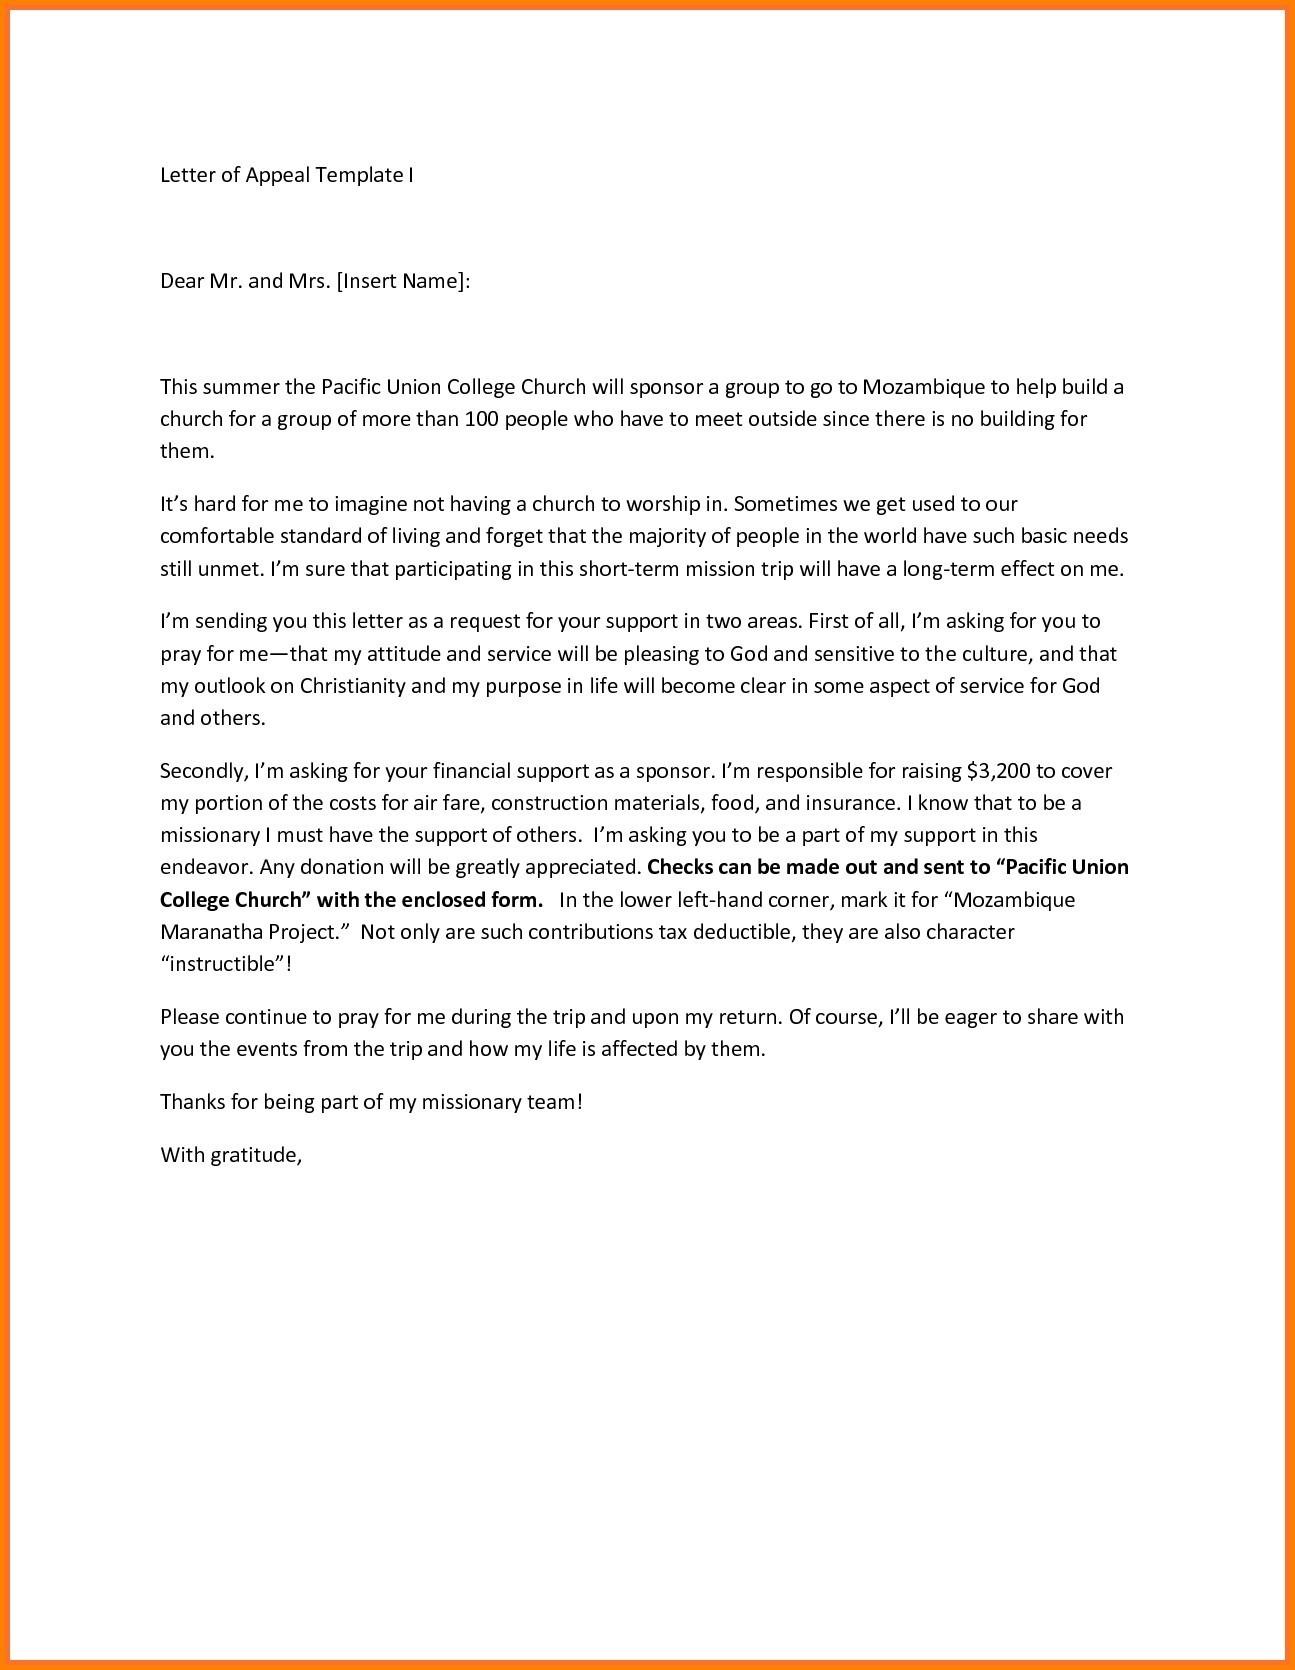 Missionary Prayer Letter Template - Legal Appeal Letter format Fresh Appeal Letter format Scho Letter